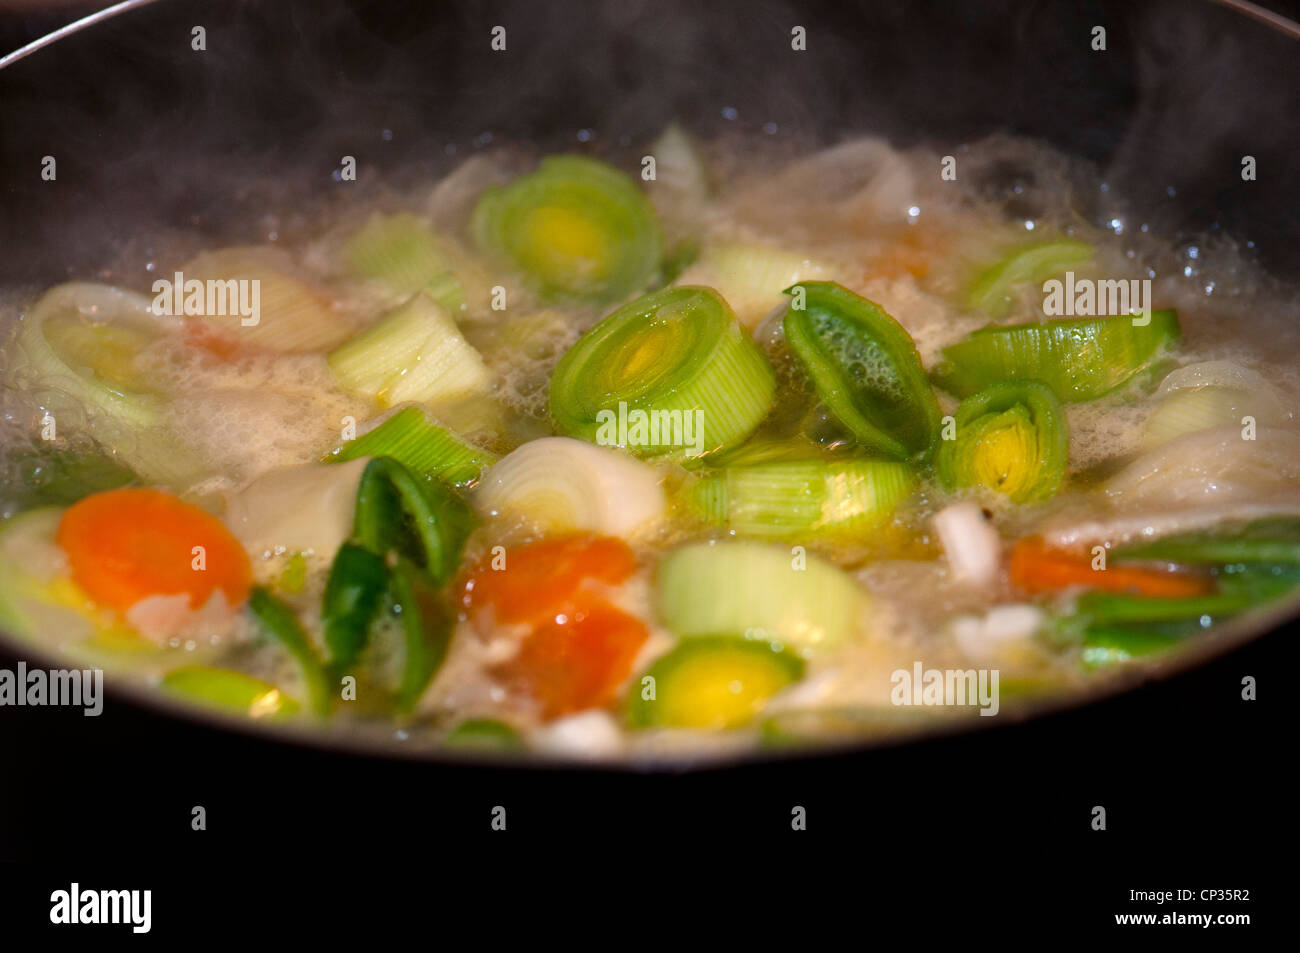 Diced vegetables simmering on hob Stock Photo